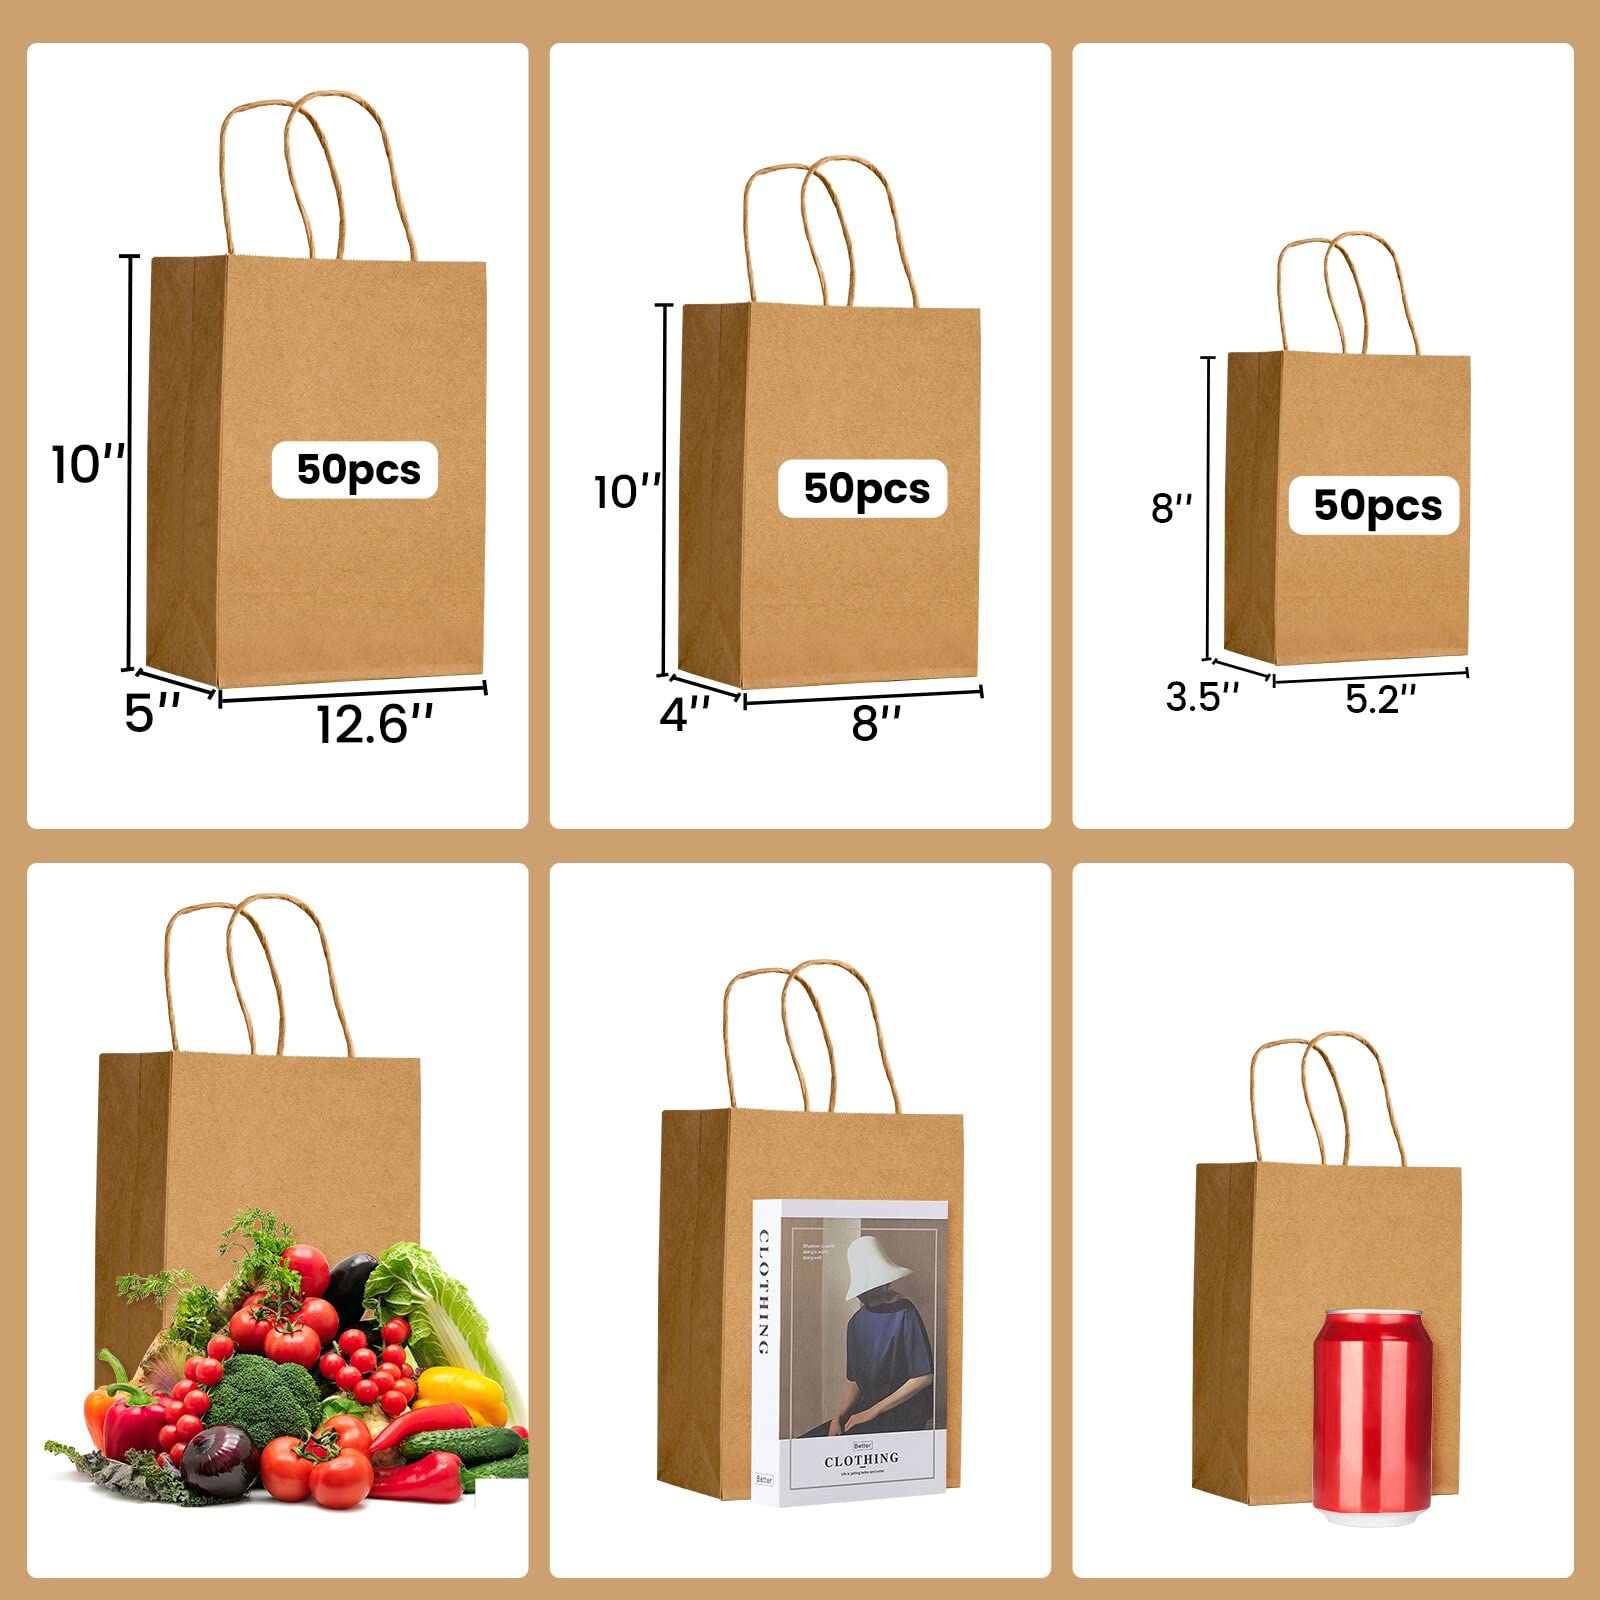 150pcs Brown Kraft Paper Bags with Handles Mixed Size Gift Bags Bulk,Perfect Kraft Paper Bags for Business, Shopping Bags,Retail Bags,Party Bags,Favor Bags,Merchandise Bags